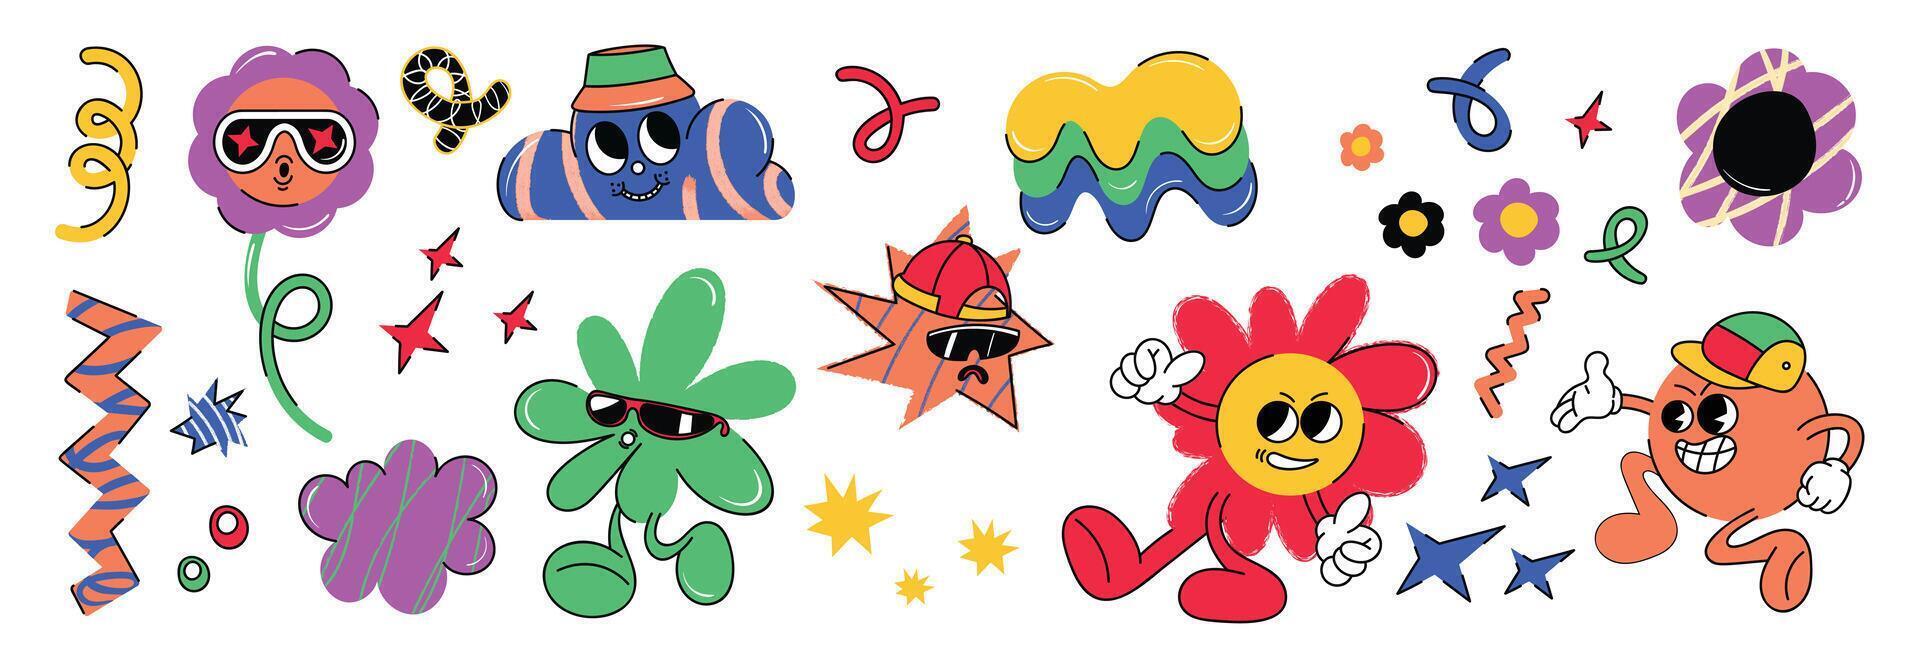 Set of funky groovy element vector. Collection of cartoon characters, doodle smile face, flower, orange, hat, sparkle. Cute retro groovy hippie design for decorative, sticker, kids, clipart. vector